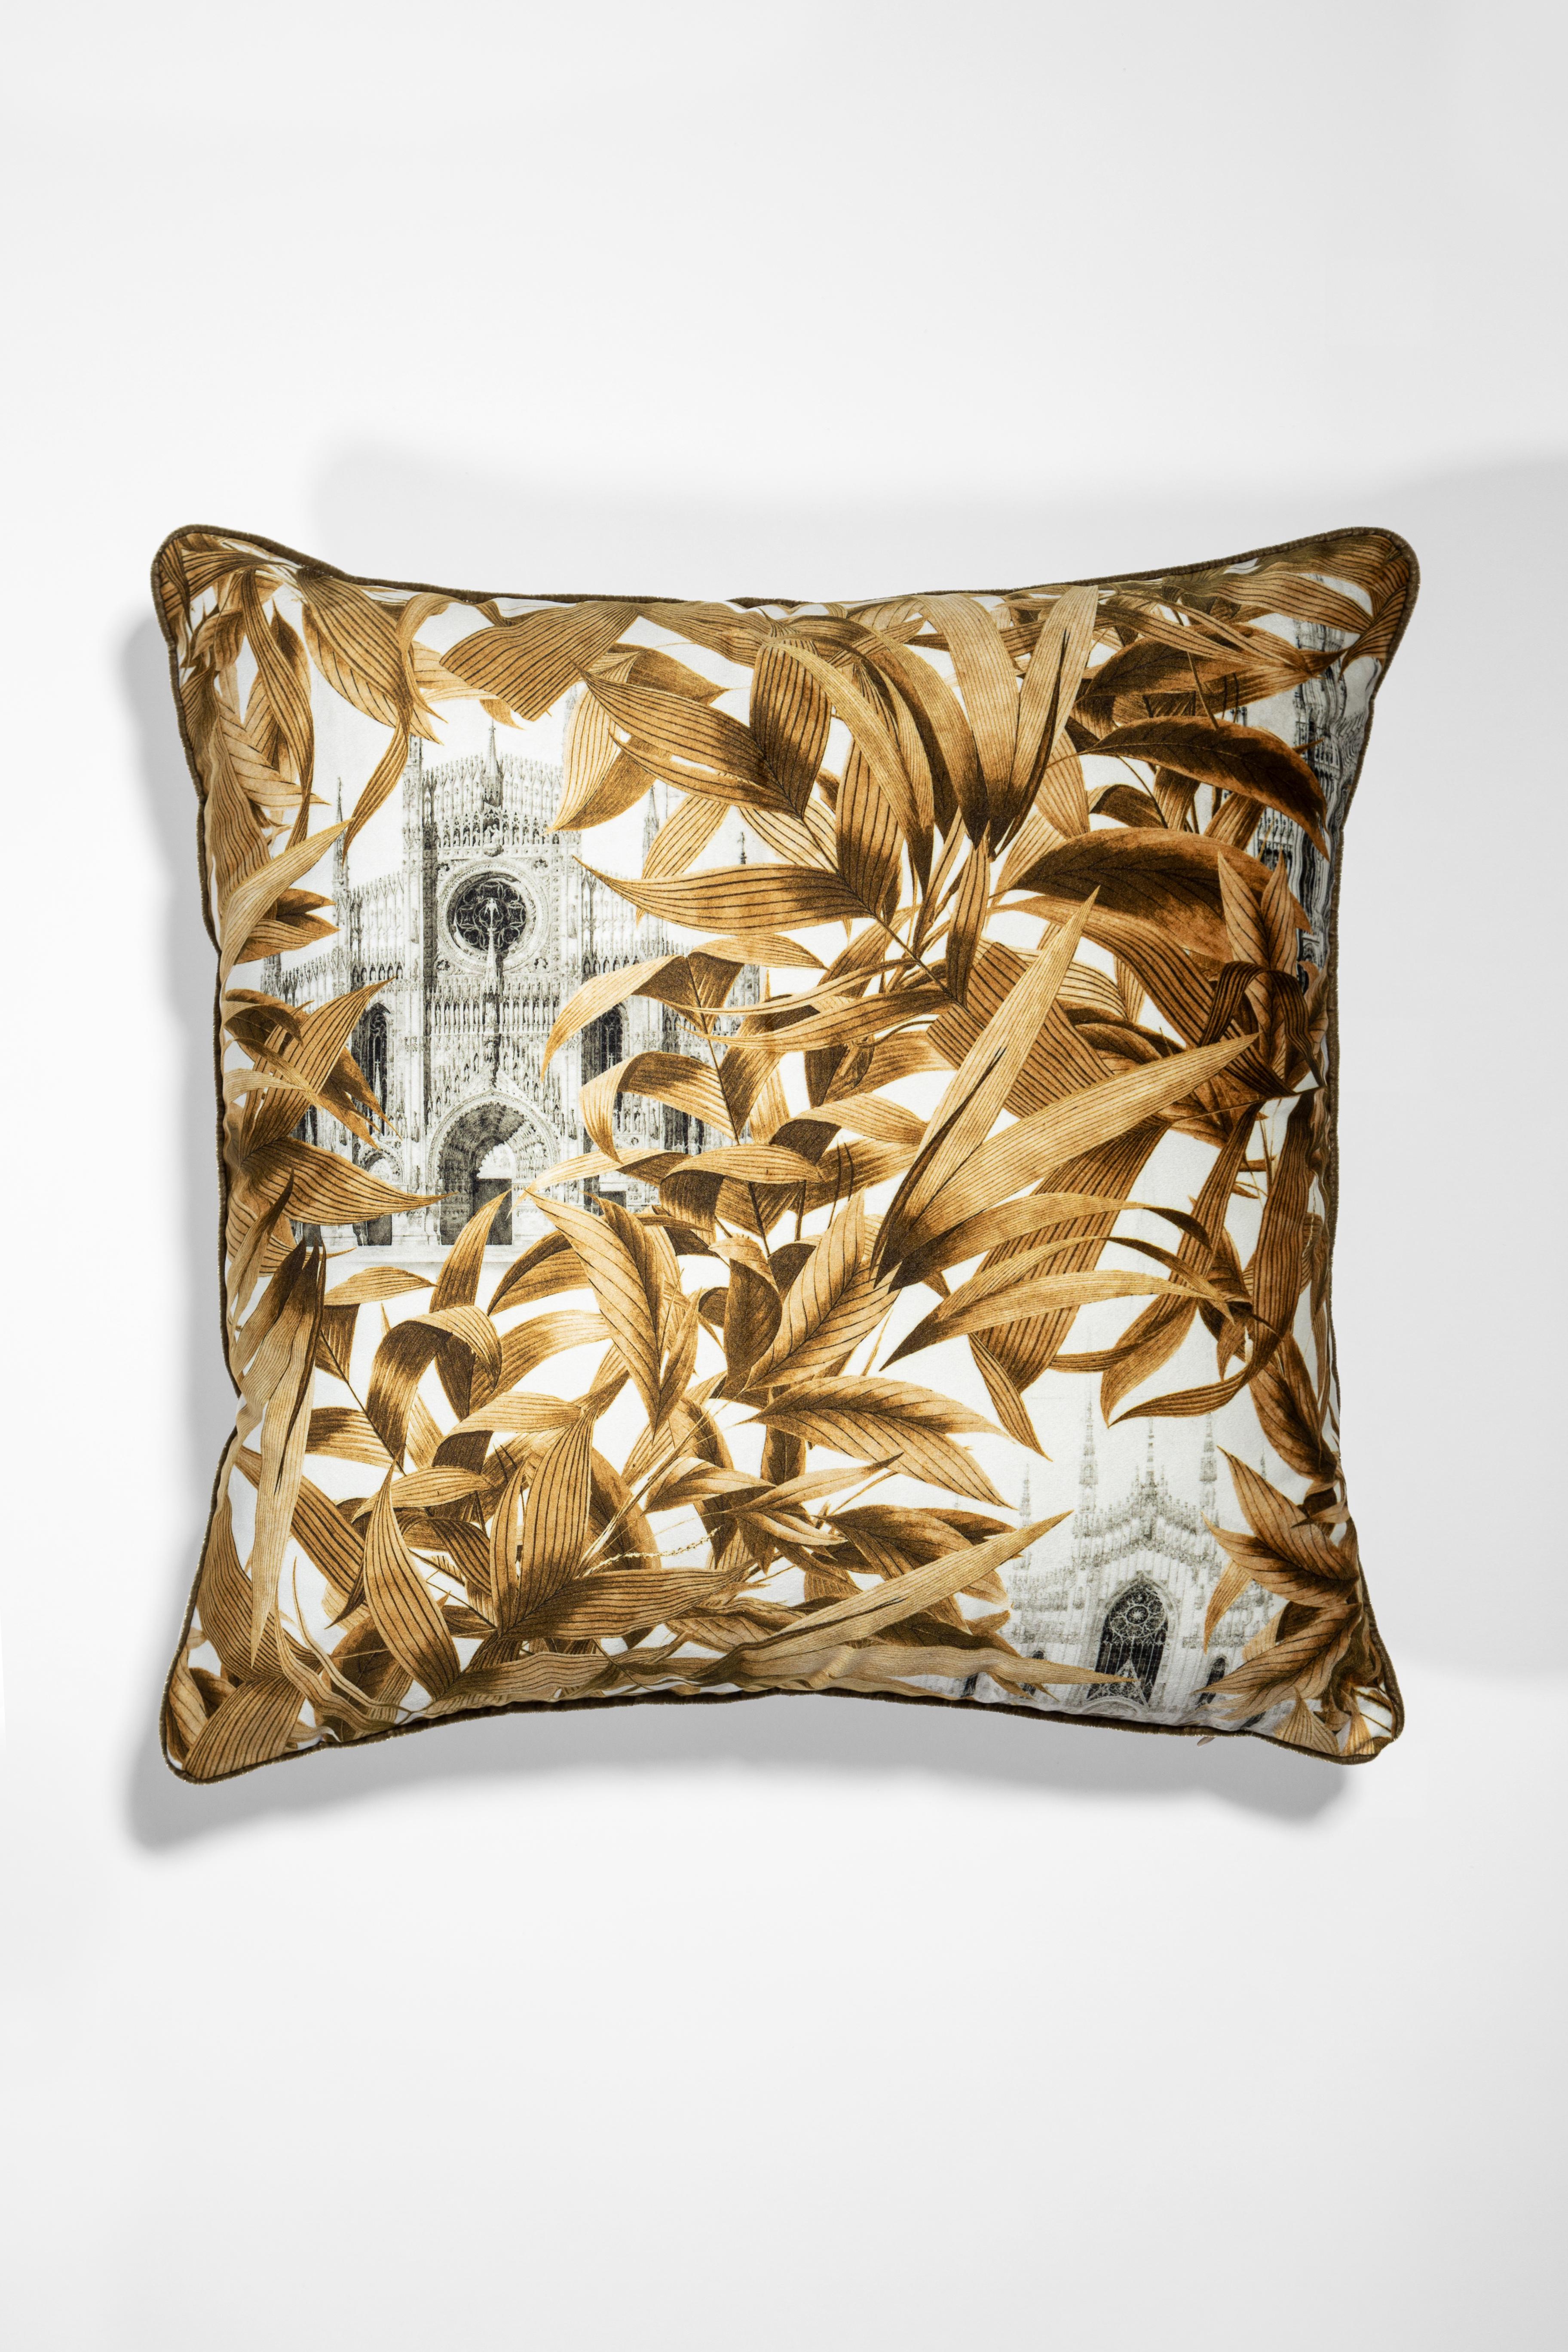 From the encounter between the historical archives of the Duomo di Milano and the imagery of Grand Tour by Vito Nesta, this unique collections of cushions were born. “Il Duomo che Non c’e” collects a selection of the most evocative designs that were